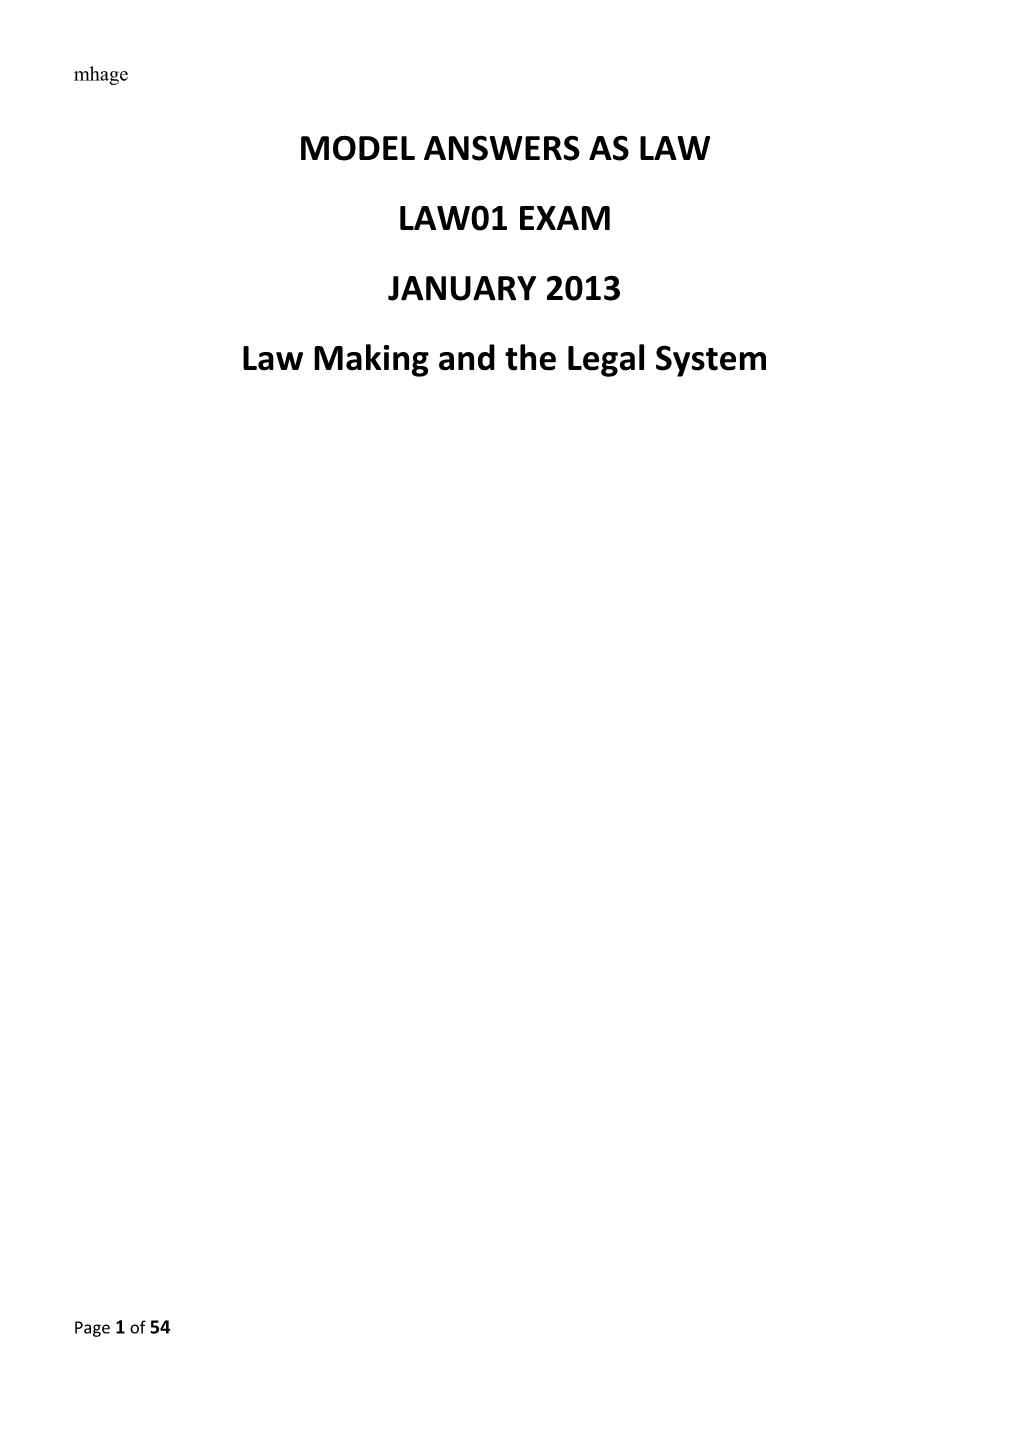 Law Making and the Legal System